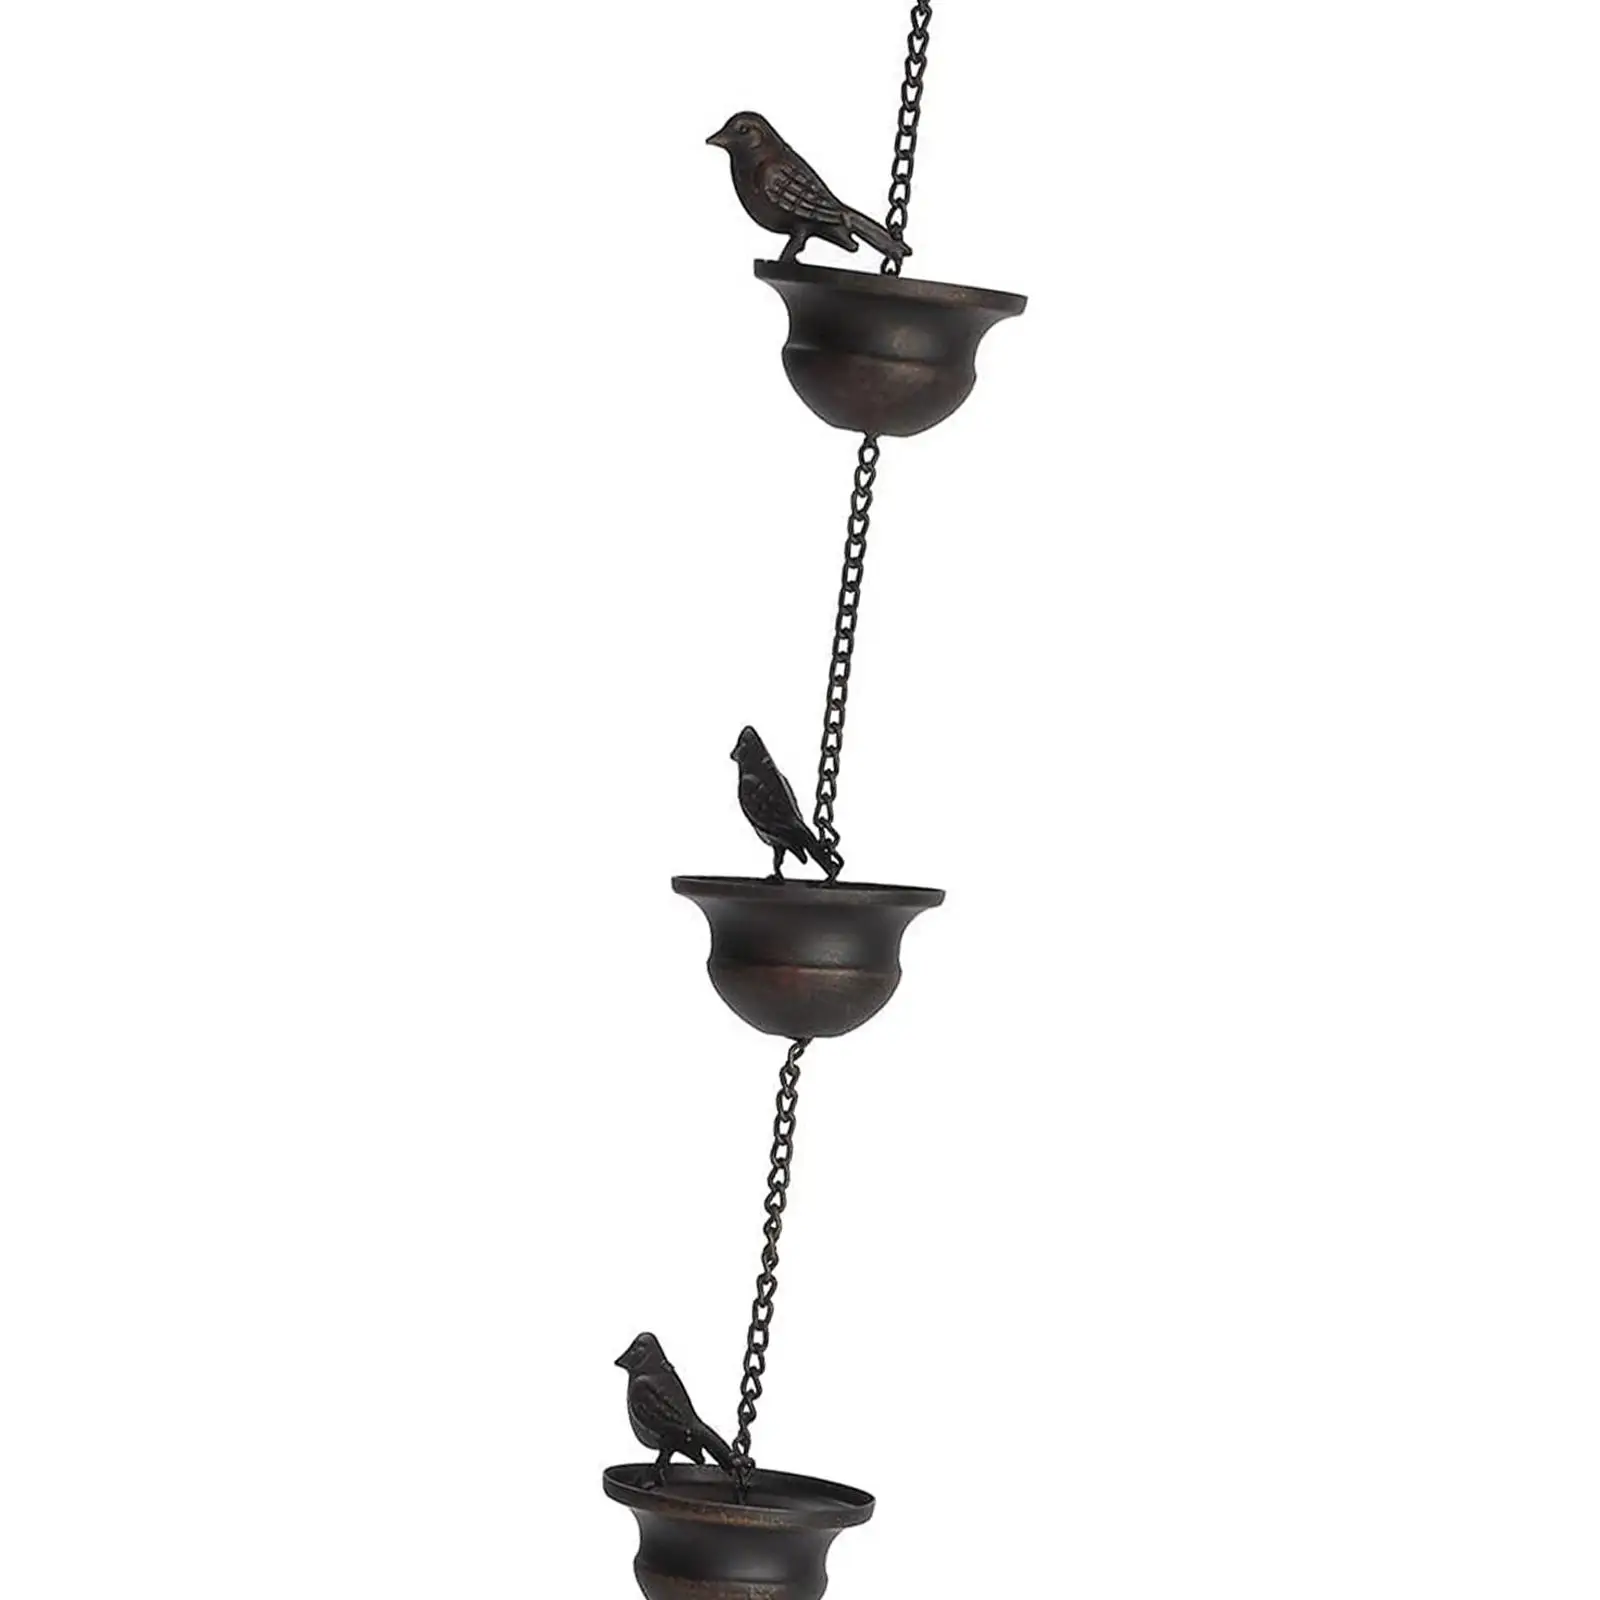 Bird Rain Chains for Gutters Replacement Downspouts Bird Bath 240cm Rainwater Catcher Chains for Roofs Yard Display Outdoor Home